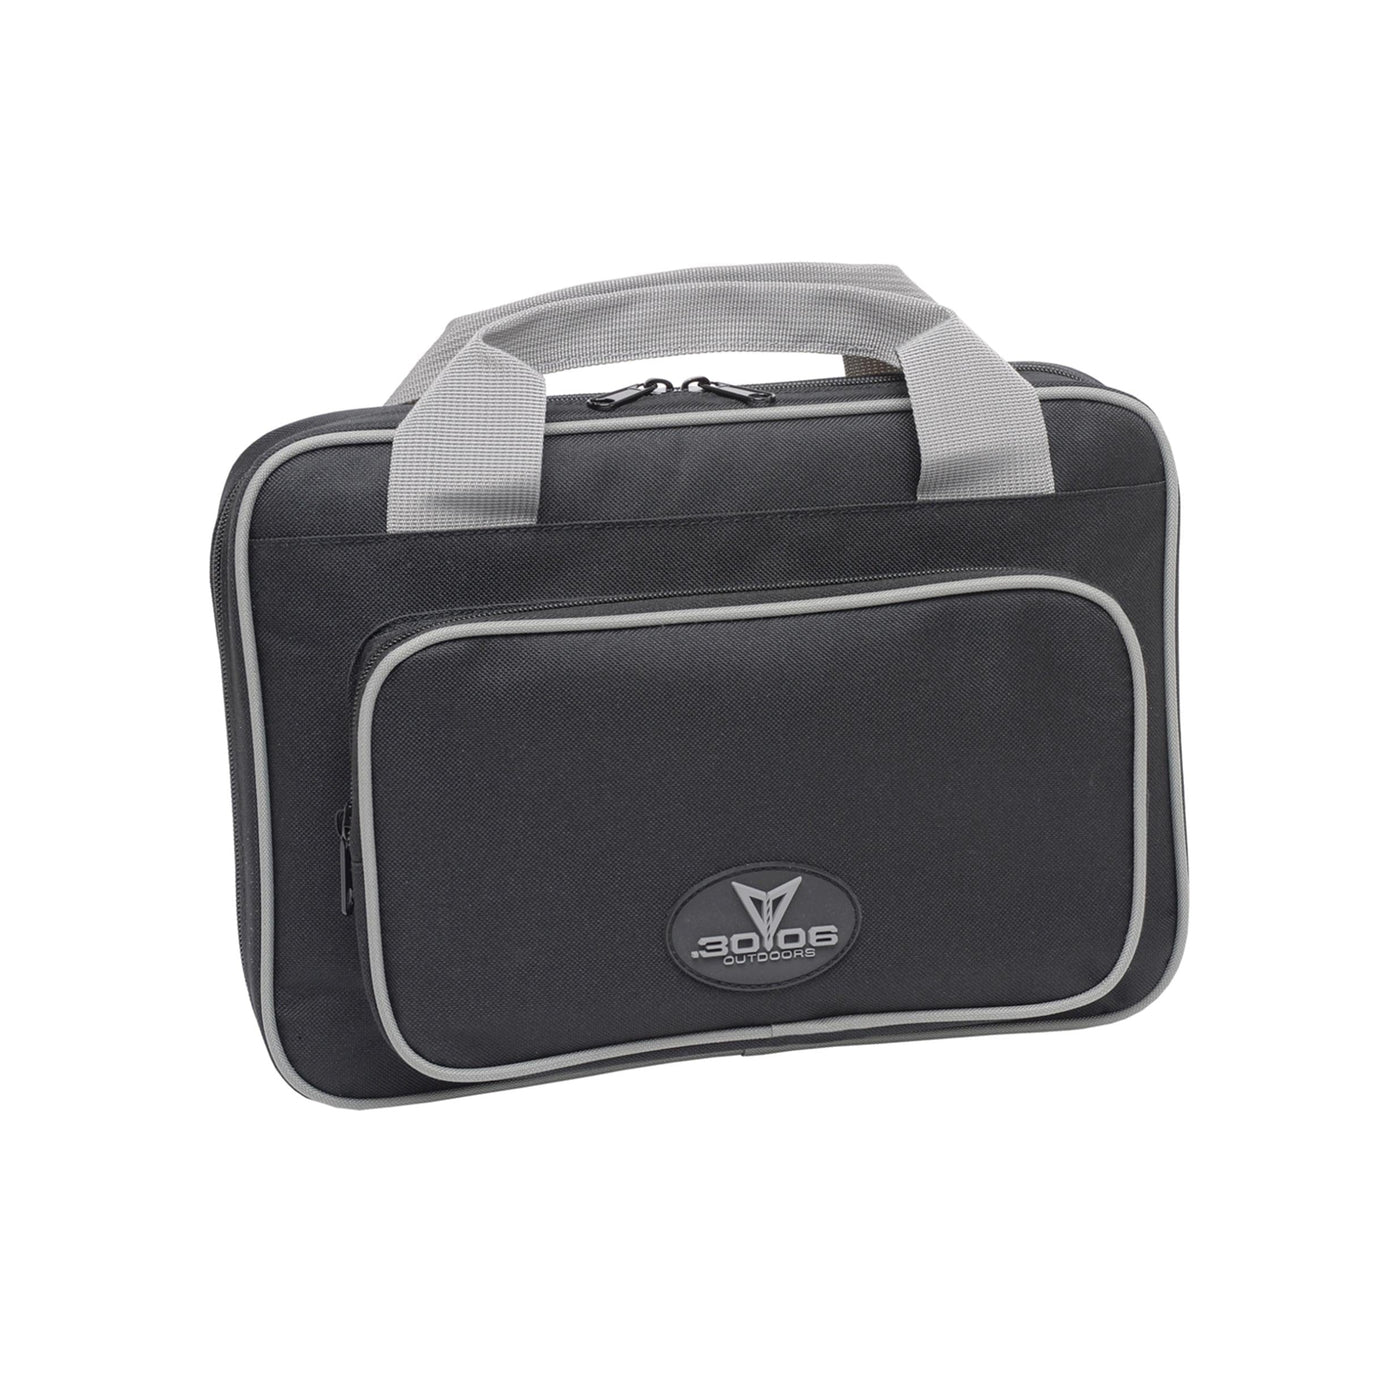 .30-06 Outdoors .30-06 OUTDOORS 13 in. Combat Hand Gun Carry Case Shooting